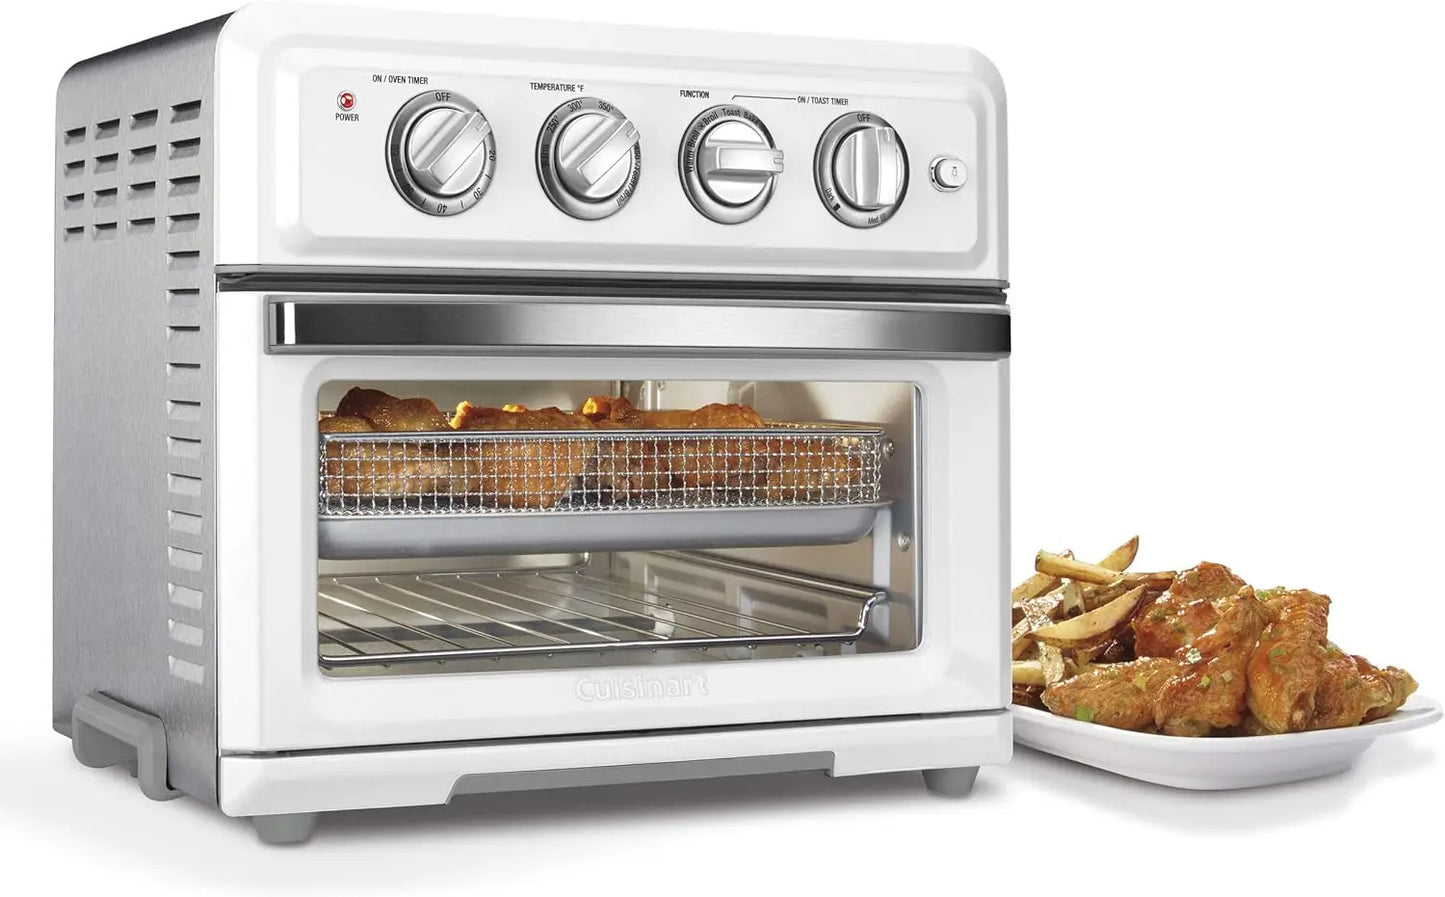 Stainless Air Fryer Toaster Oven